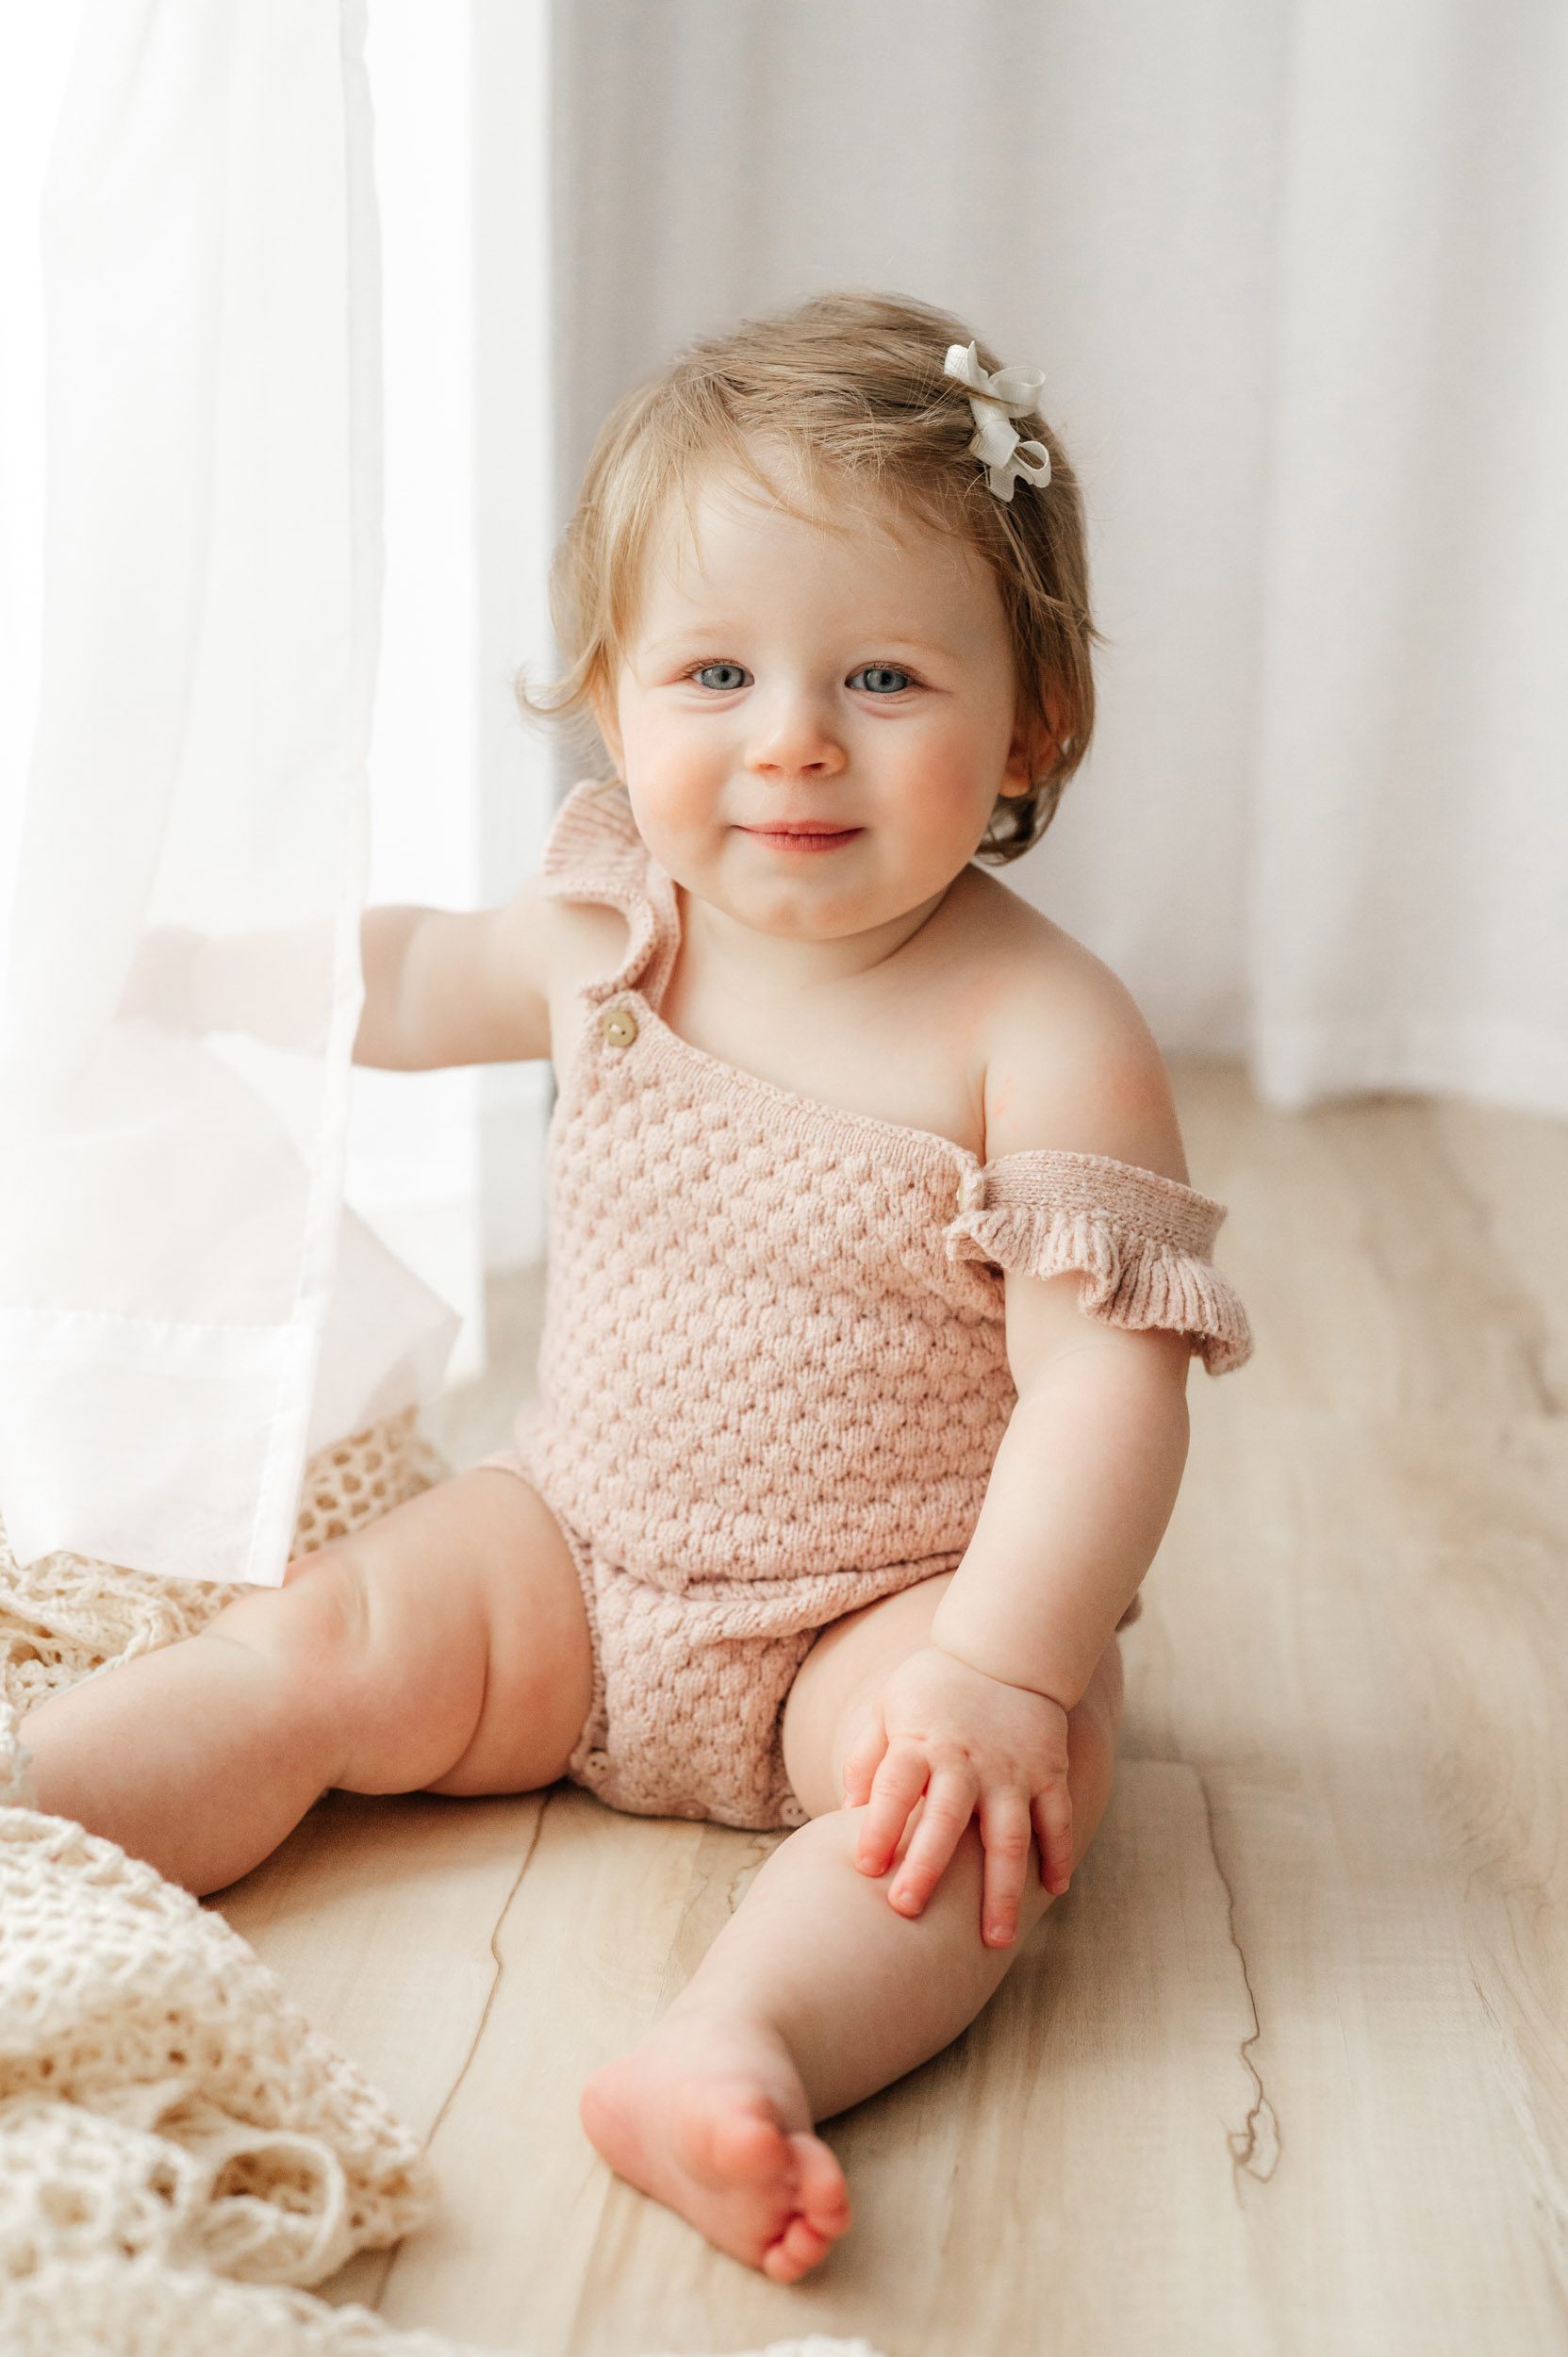 a young girl sitting on the floor and reaching out to touch the curtains that are covering the window next to her during a 1st birthday photos session